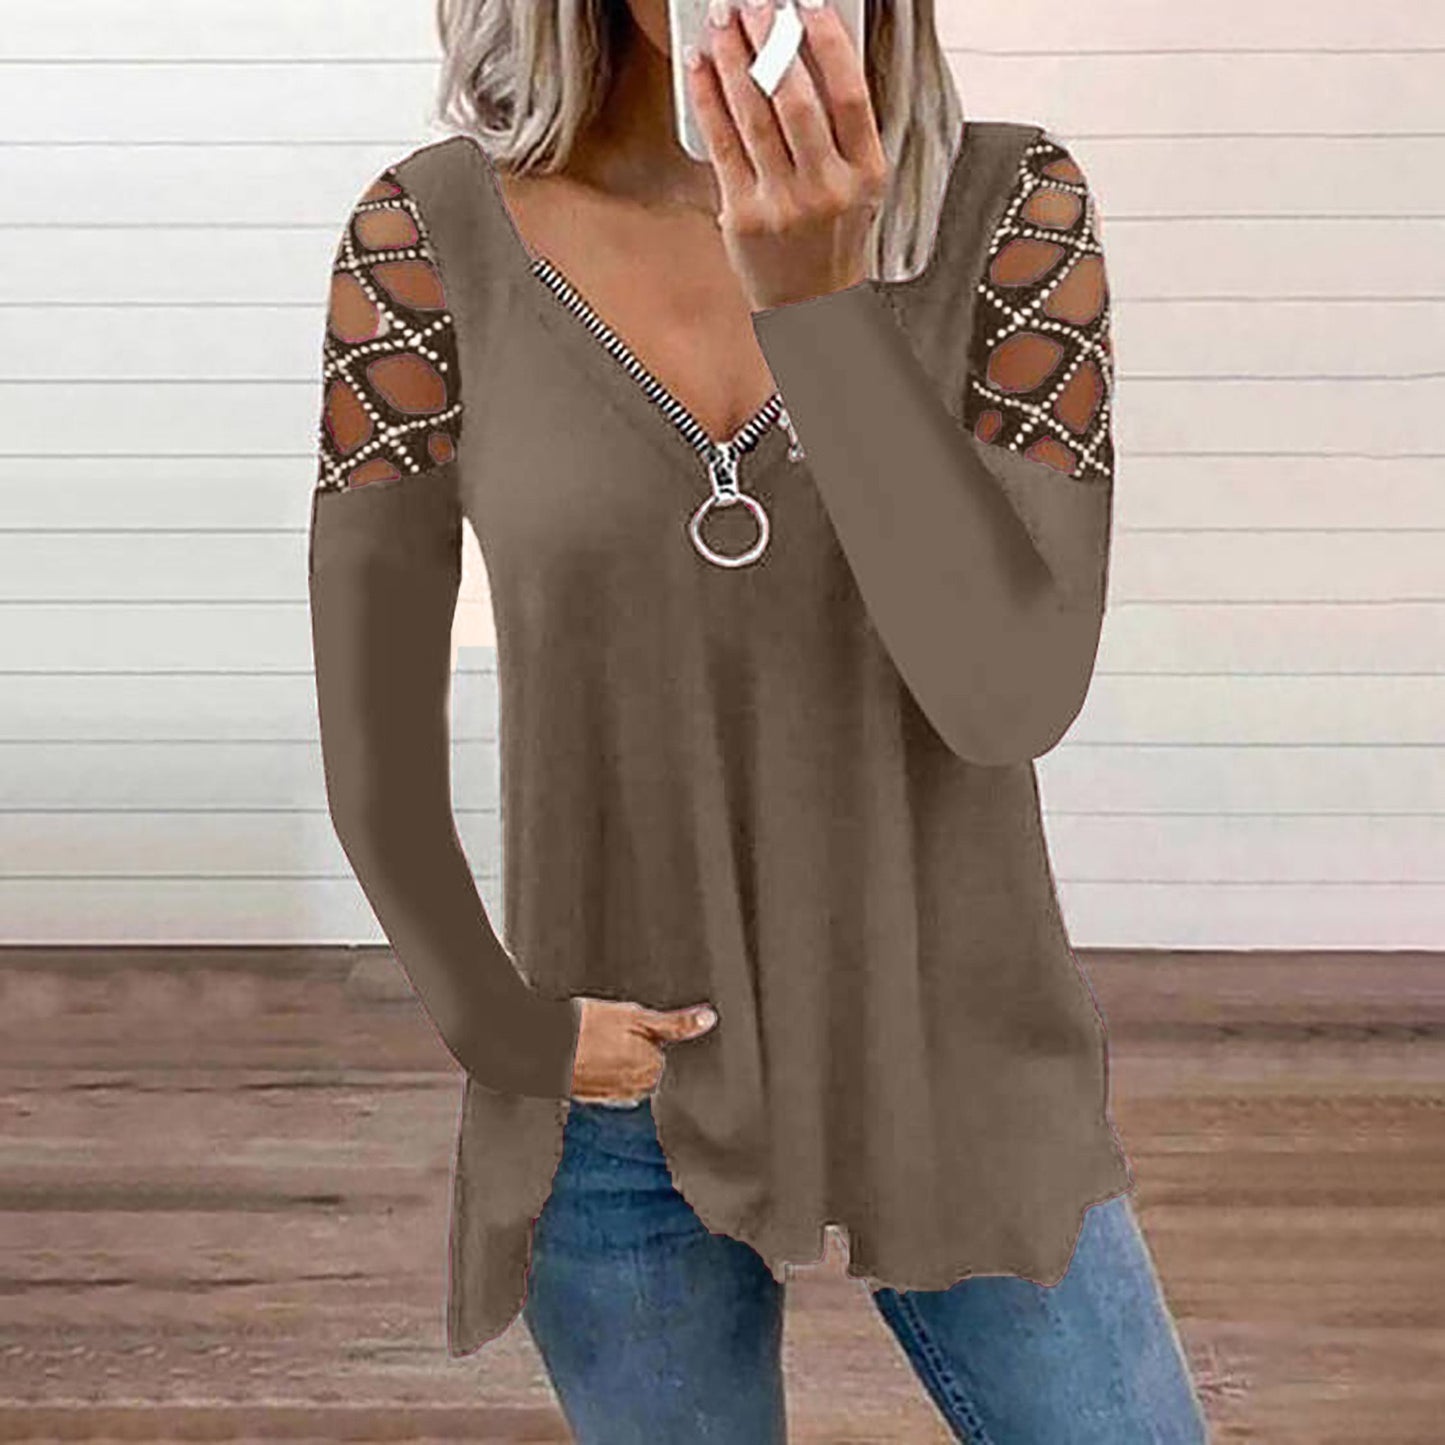 Women's Blouse Plain Cut Out Flowing tunic Long Sleeve Casual Weekend Basic V Neck Regular